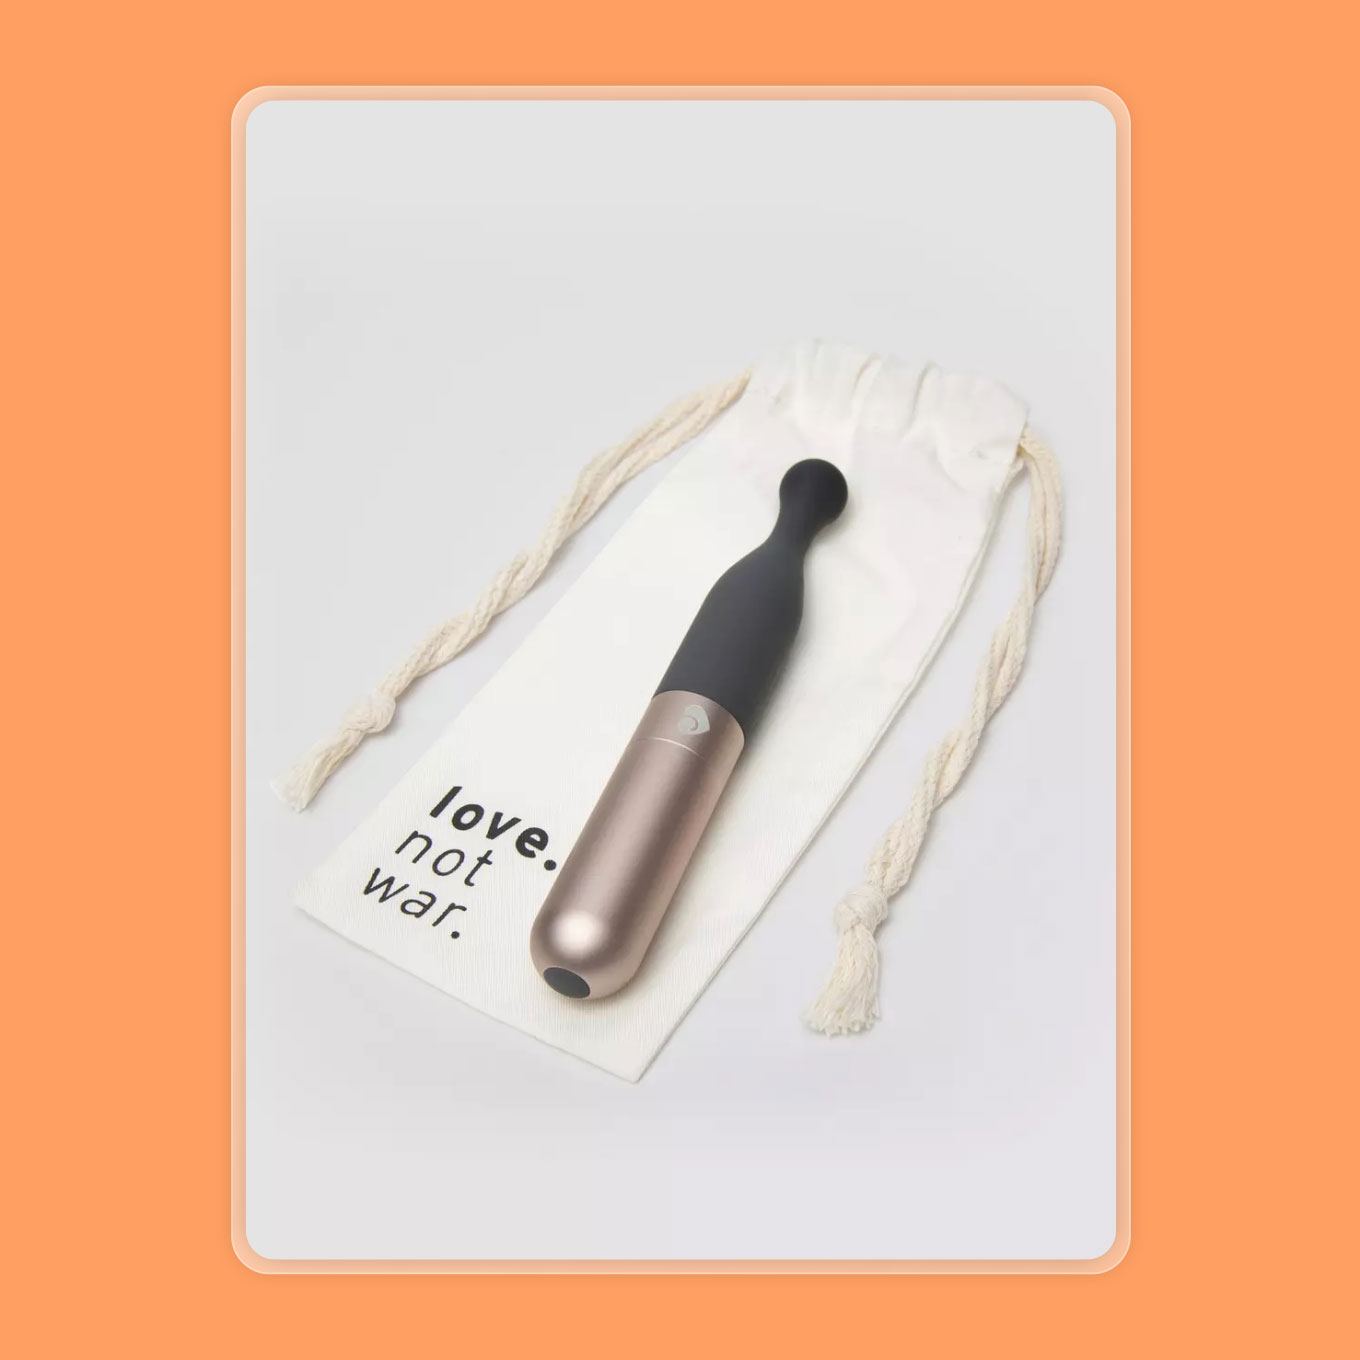 A silver and gray vibrator sits atop a canvas pouch